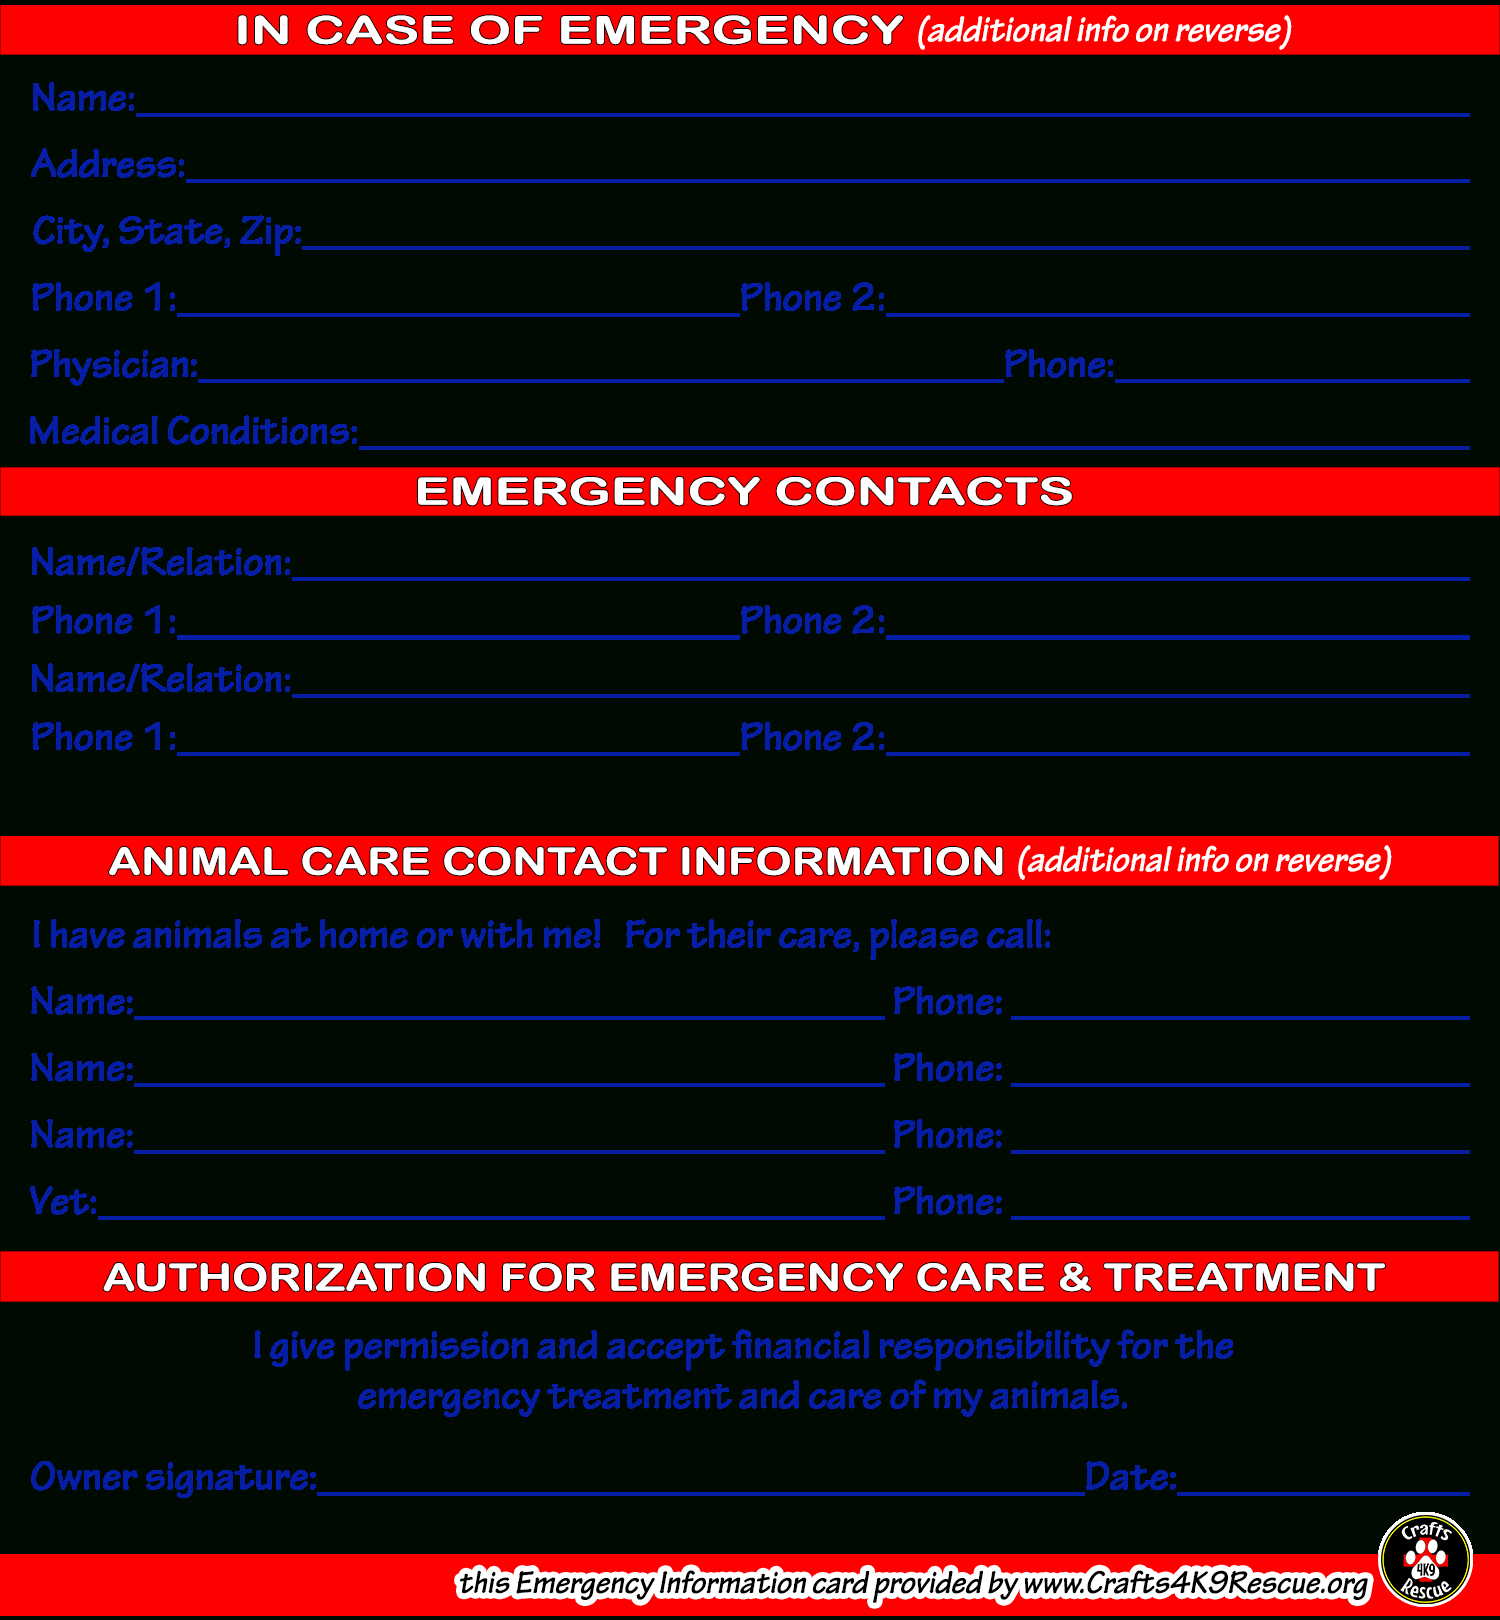 Emergency Information Card Template | Crafts4K9Rescue Intended For In Case Of Emergency Card Template